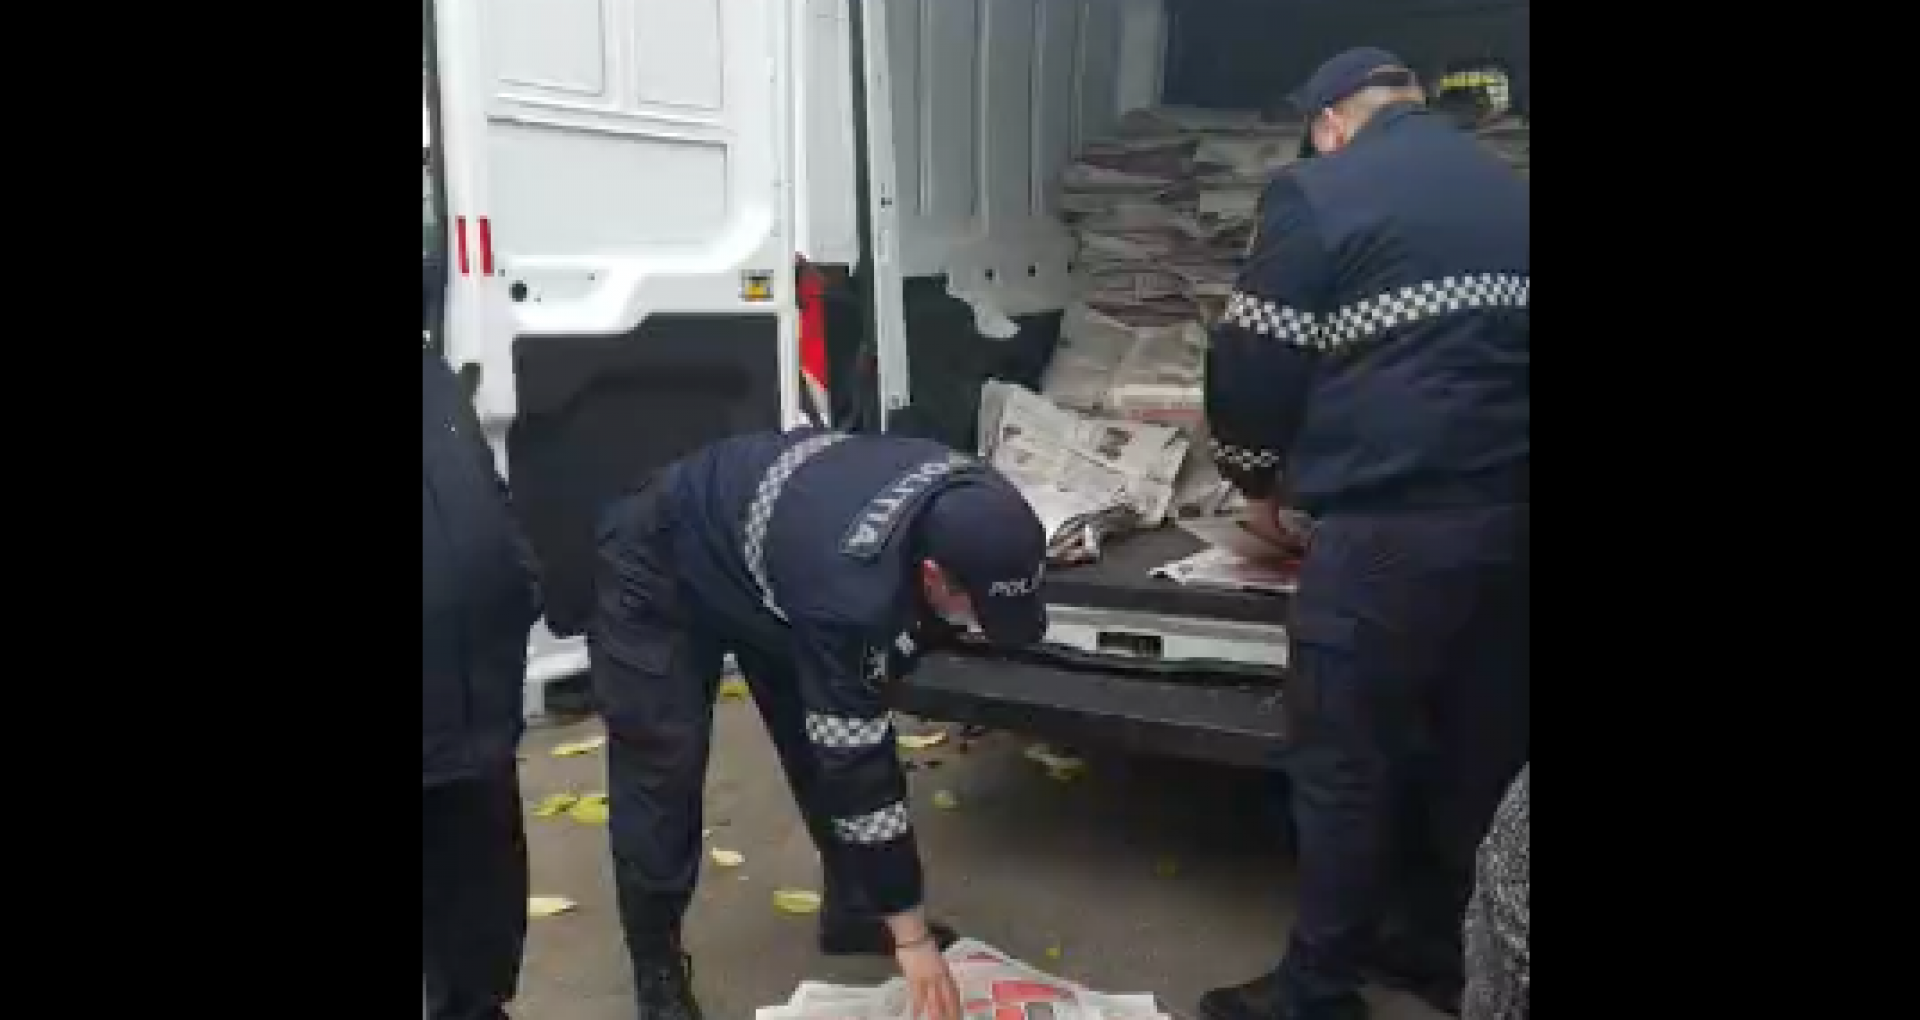 The Moldovan Authorities Confiscated Electoral Newspapers Undeclared in the Financial Report of a Presidential Candidate